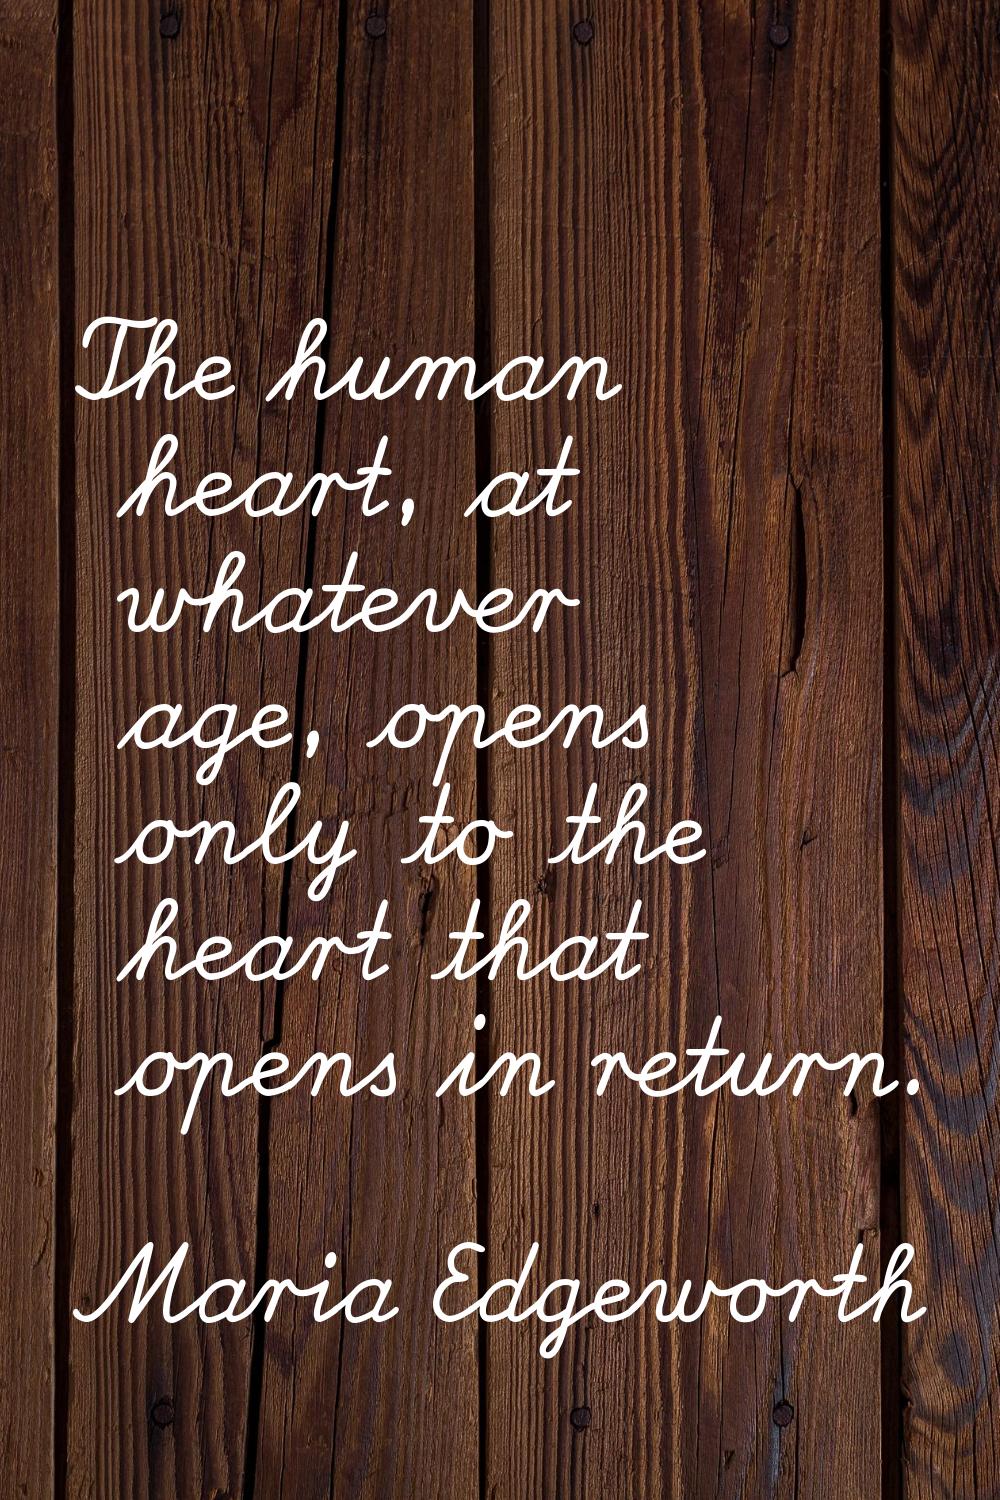 The human heart, at whatever age, opens only to the heart that opens in return.